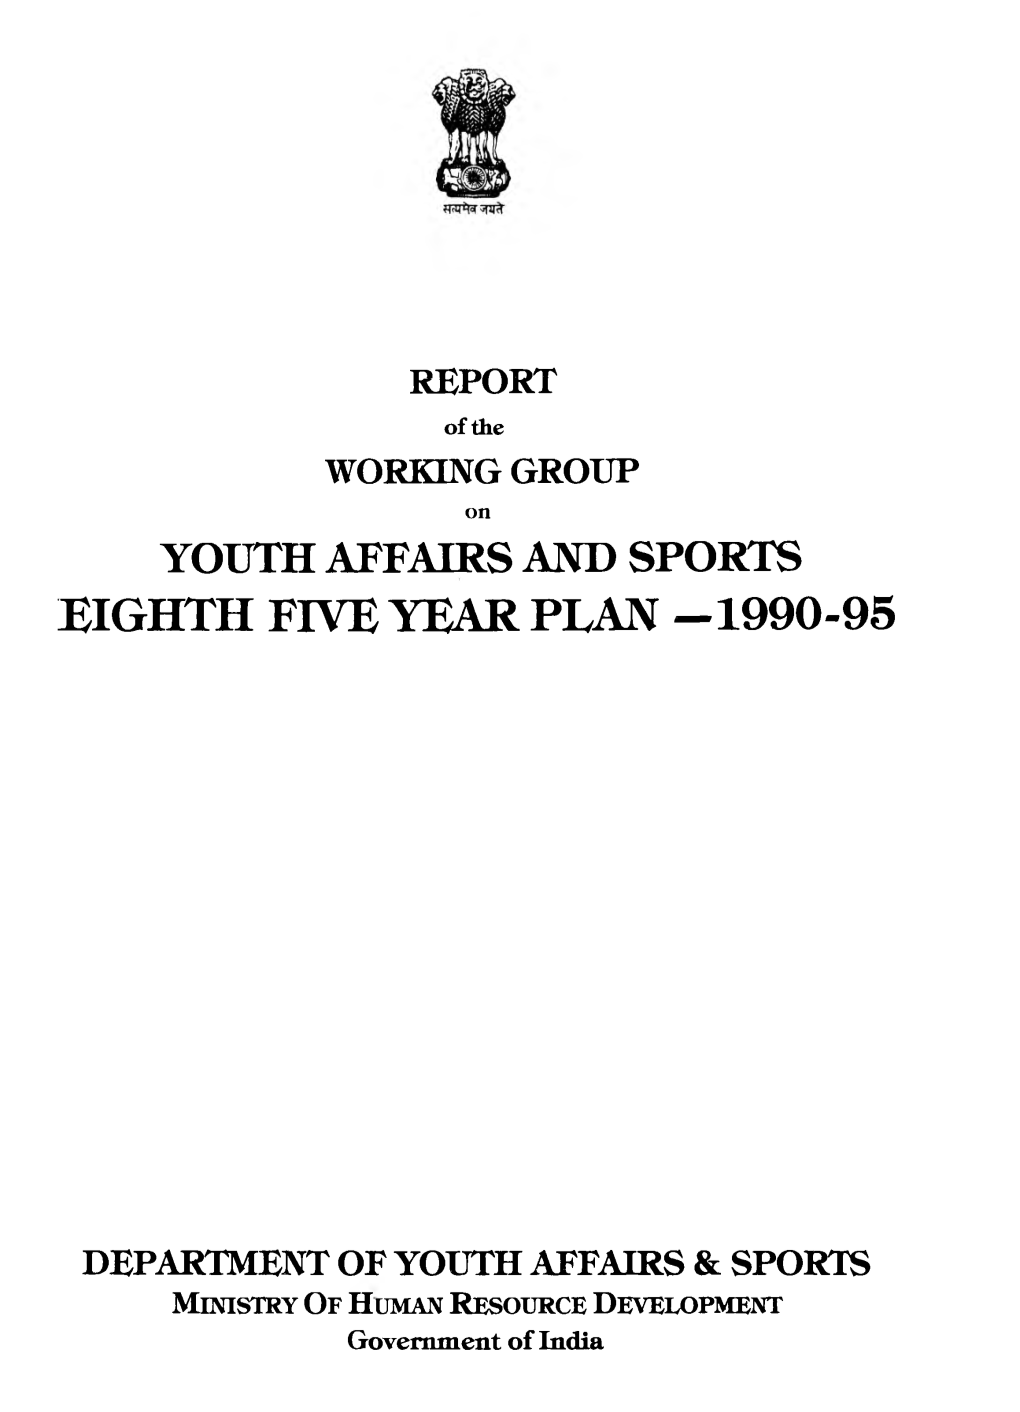 Youth Affairs and Sports Eighth Five Year Plan -1990-95